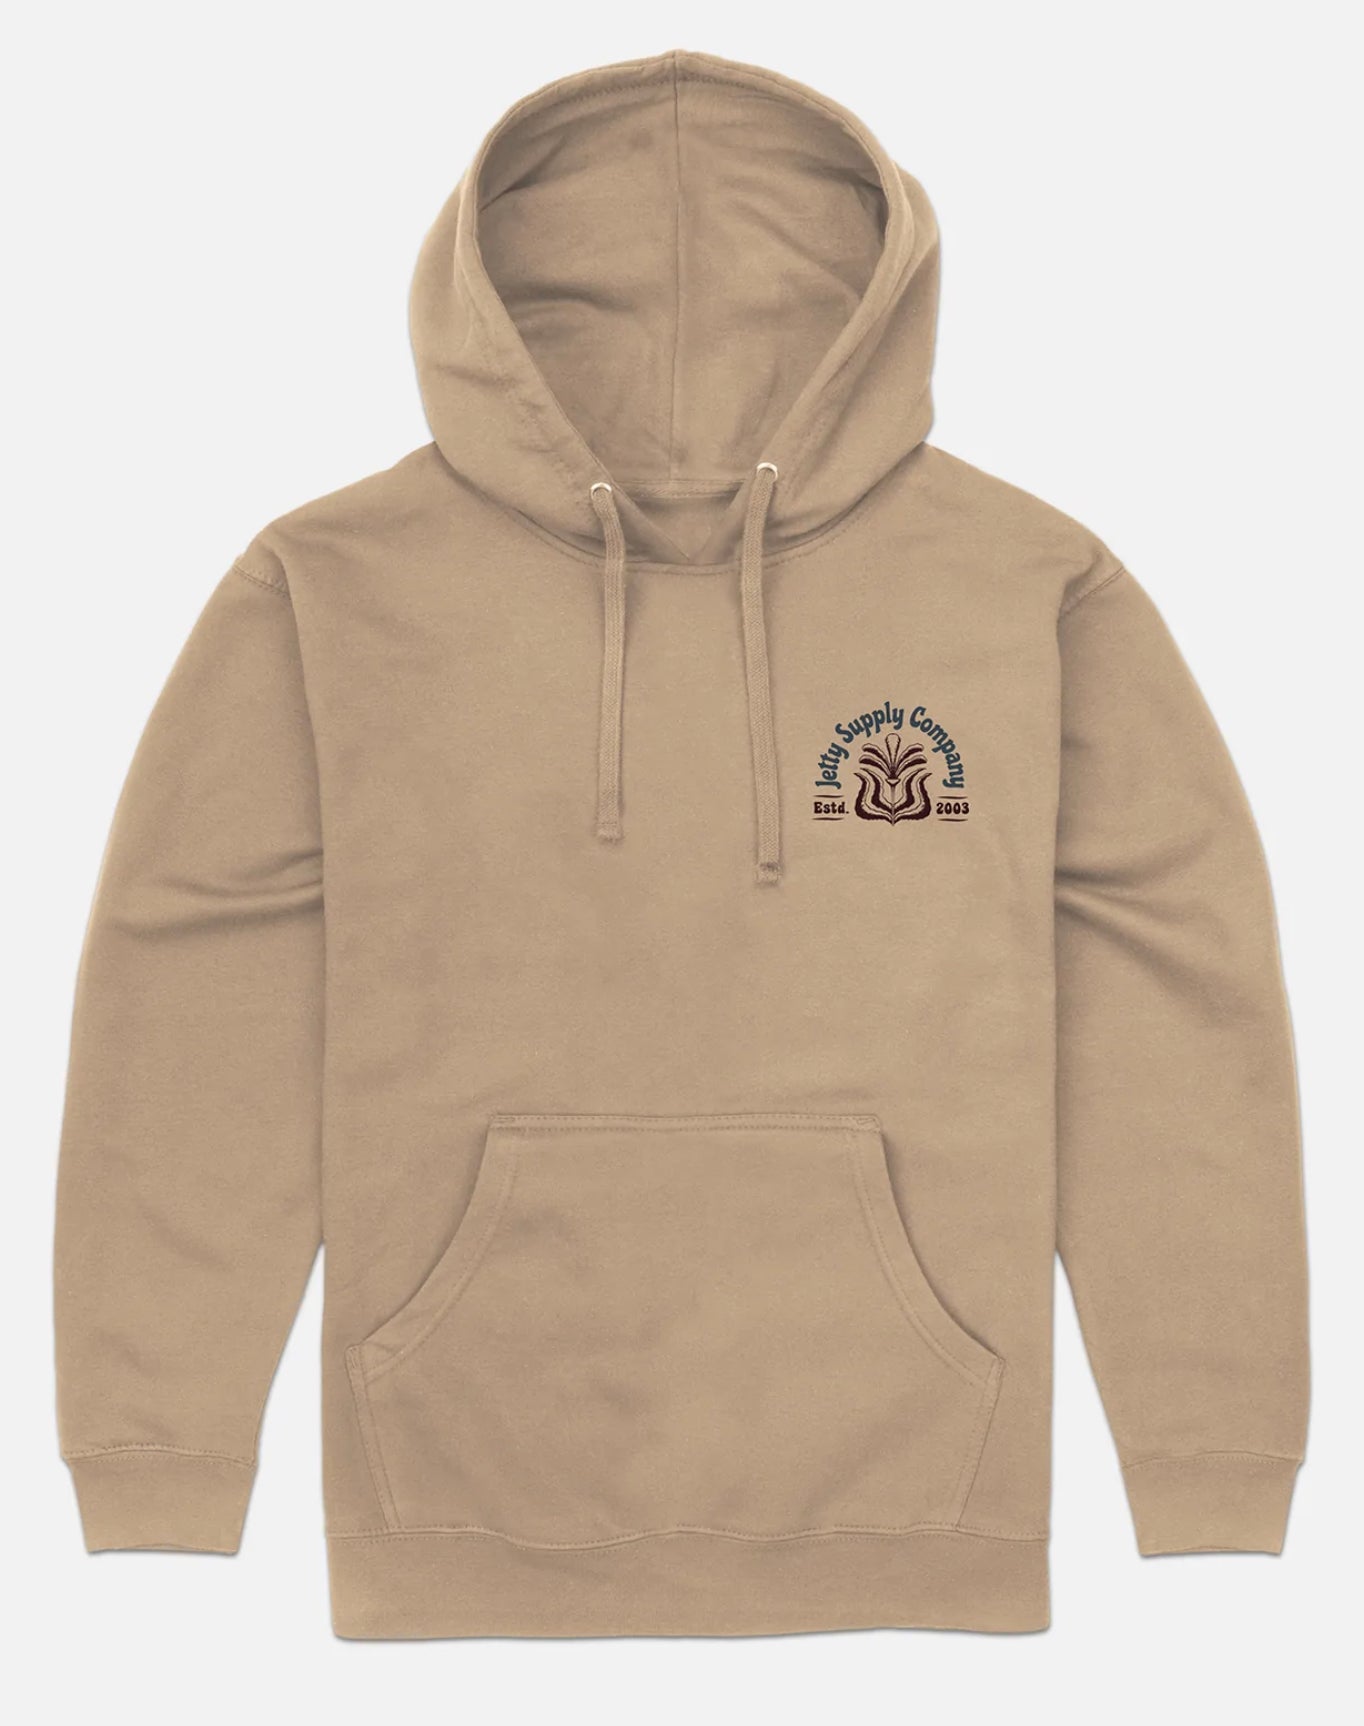 Jetty - Roots Hoodie